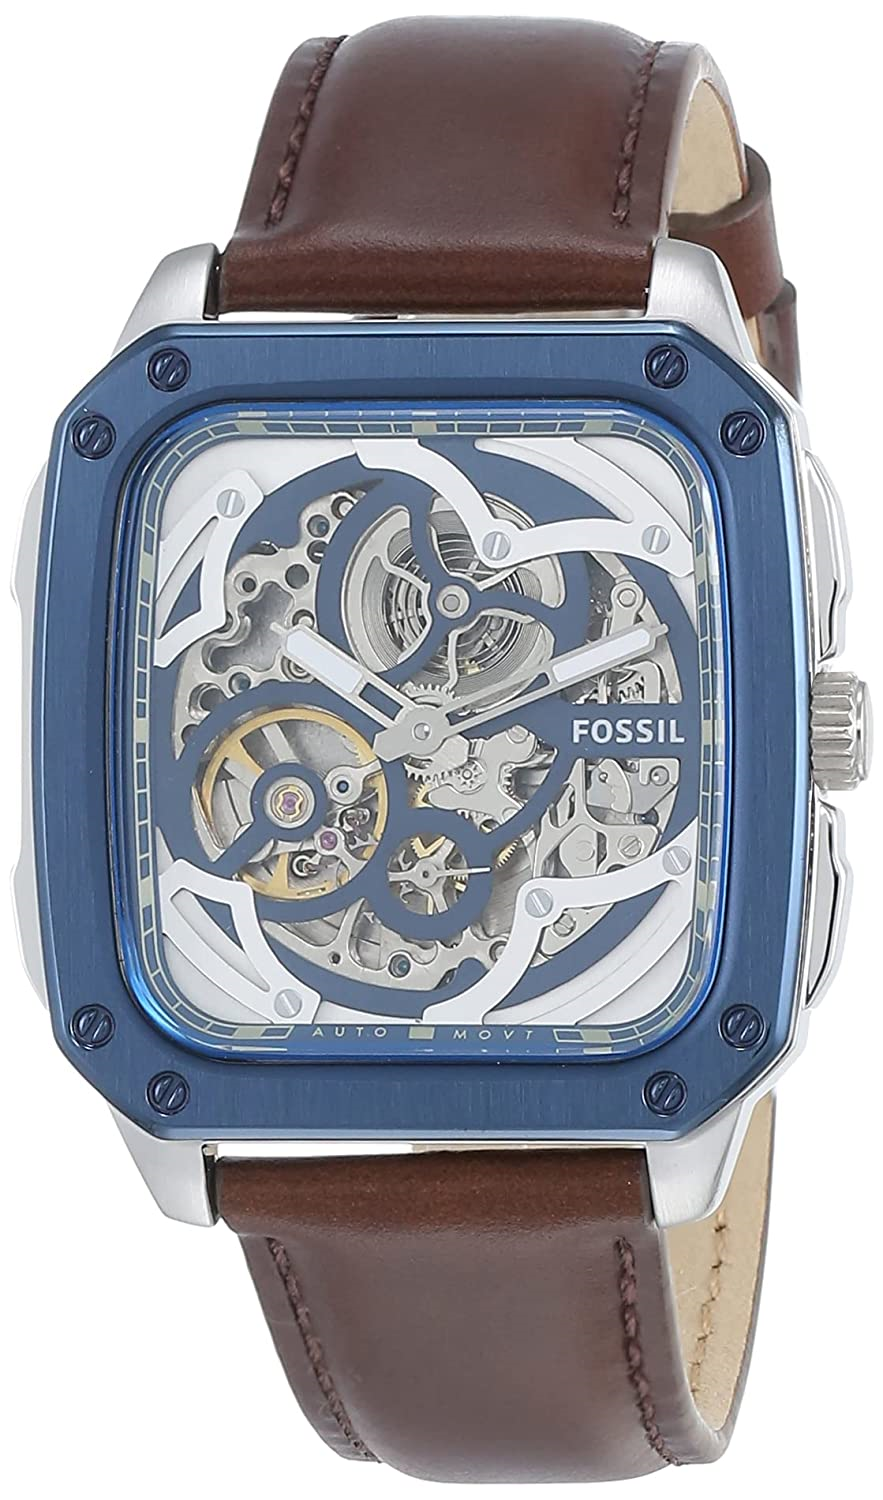 ME3202 FOSSIL WATCH